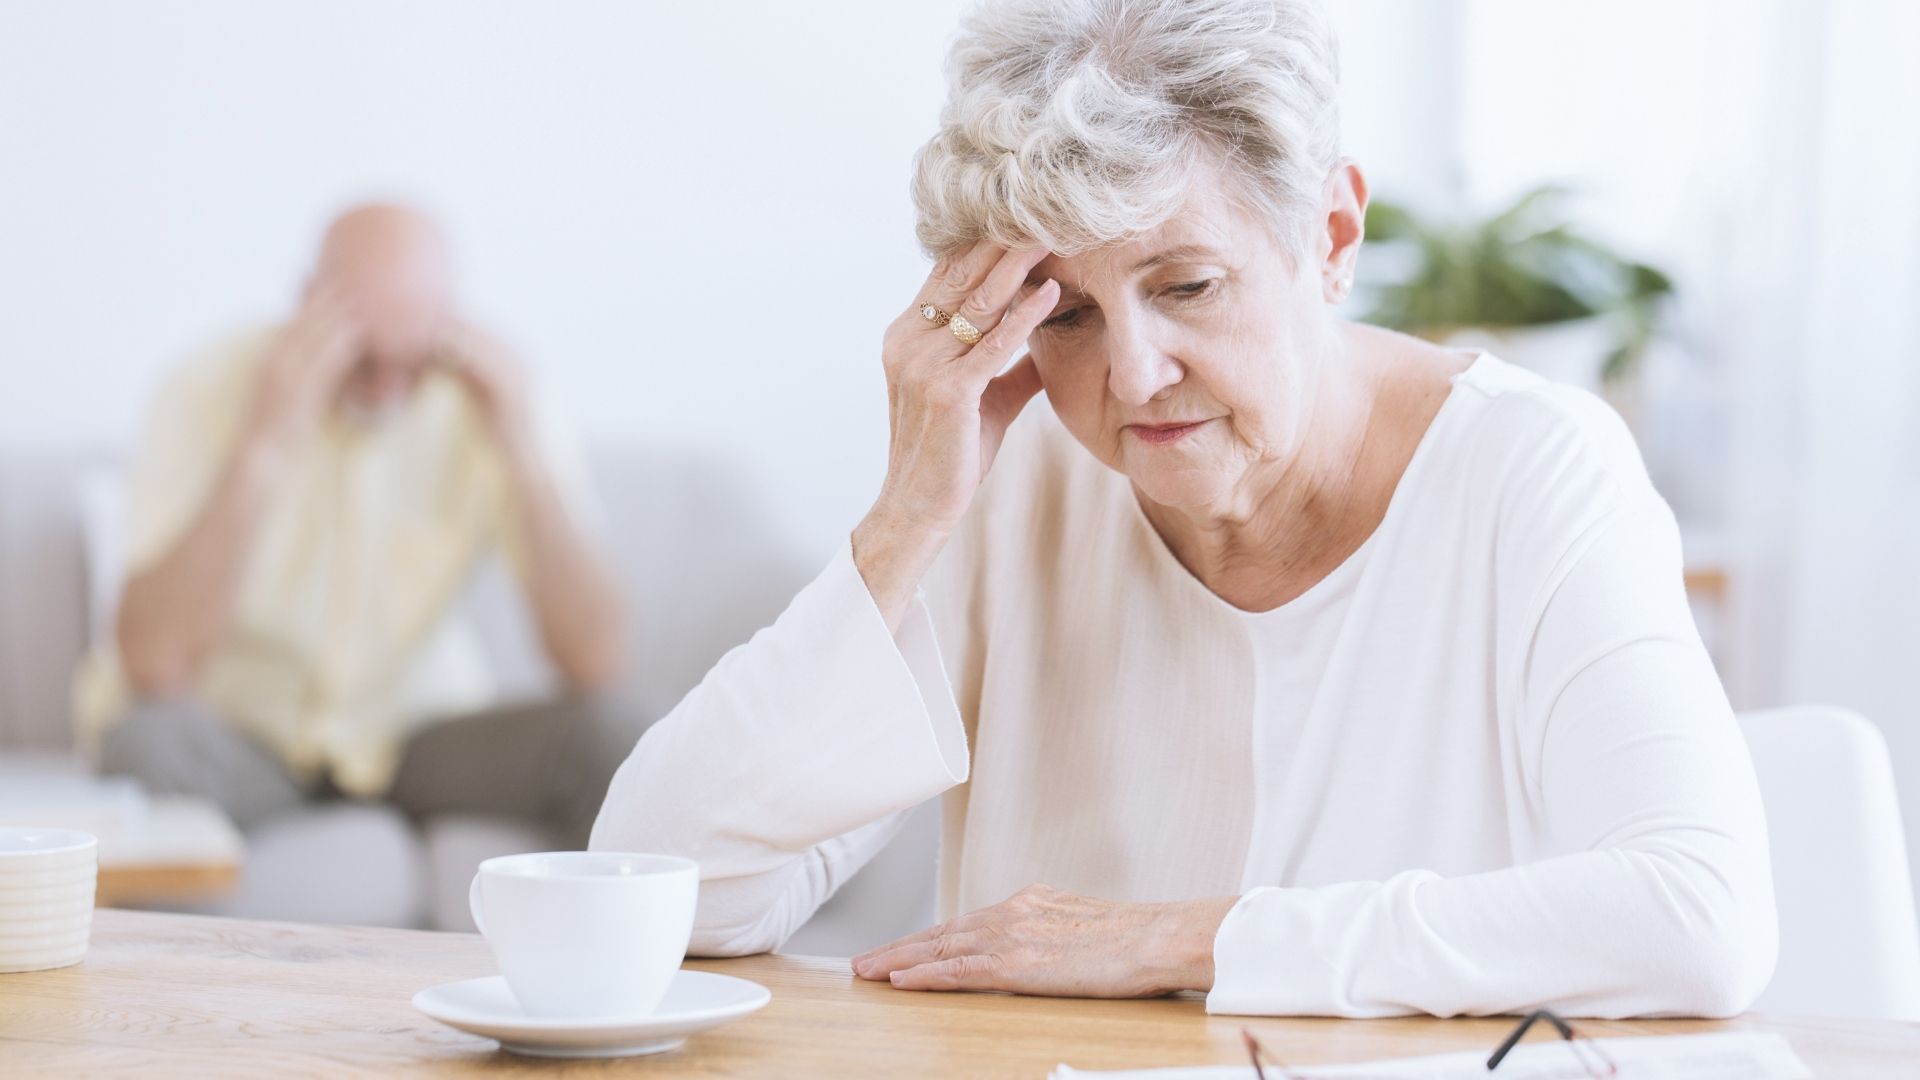 5 Tips for Identifying Cognitive Decline